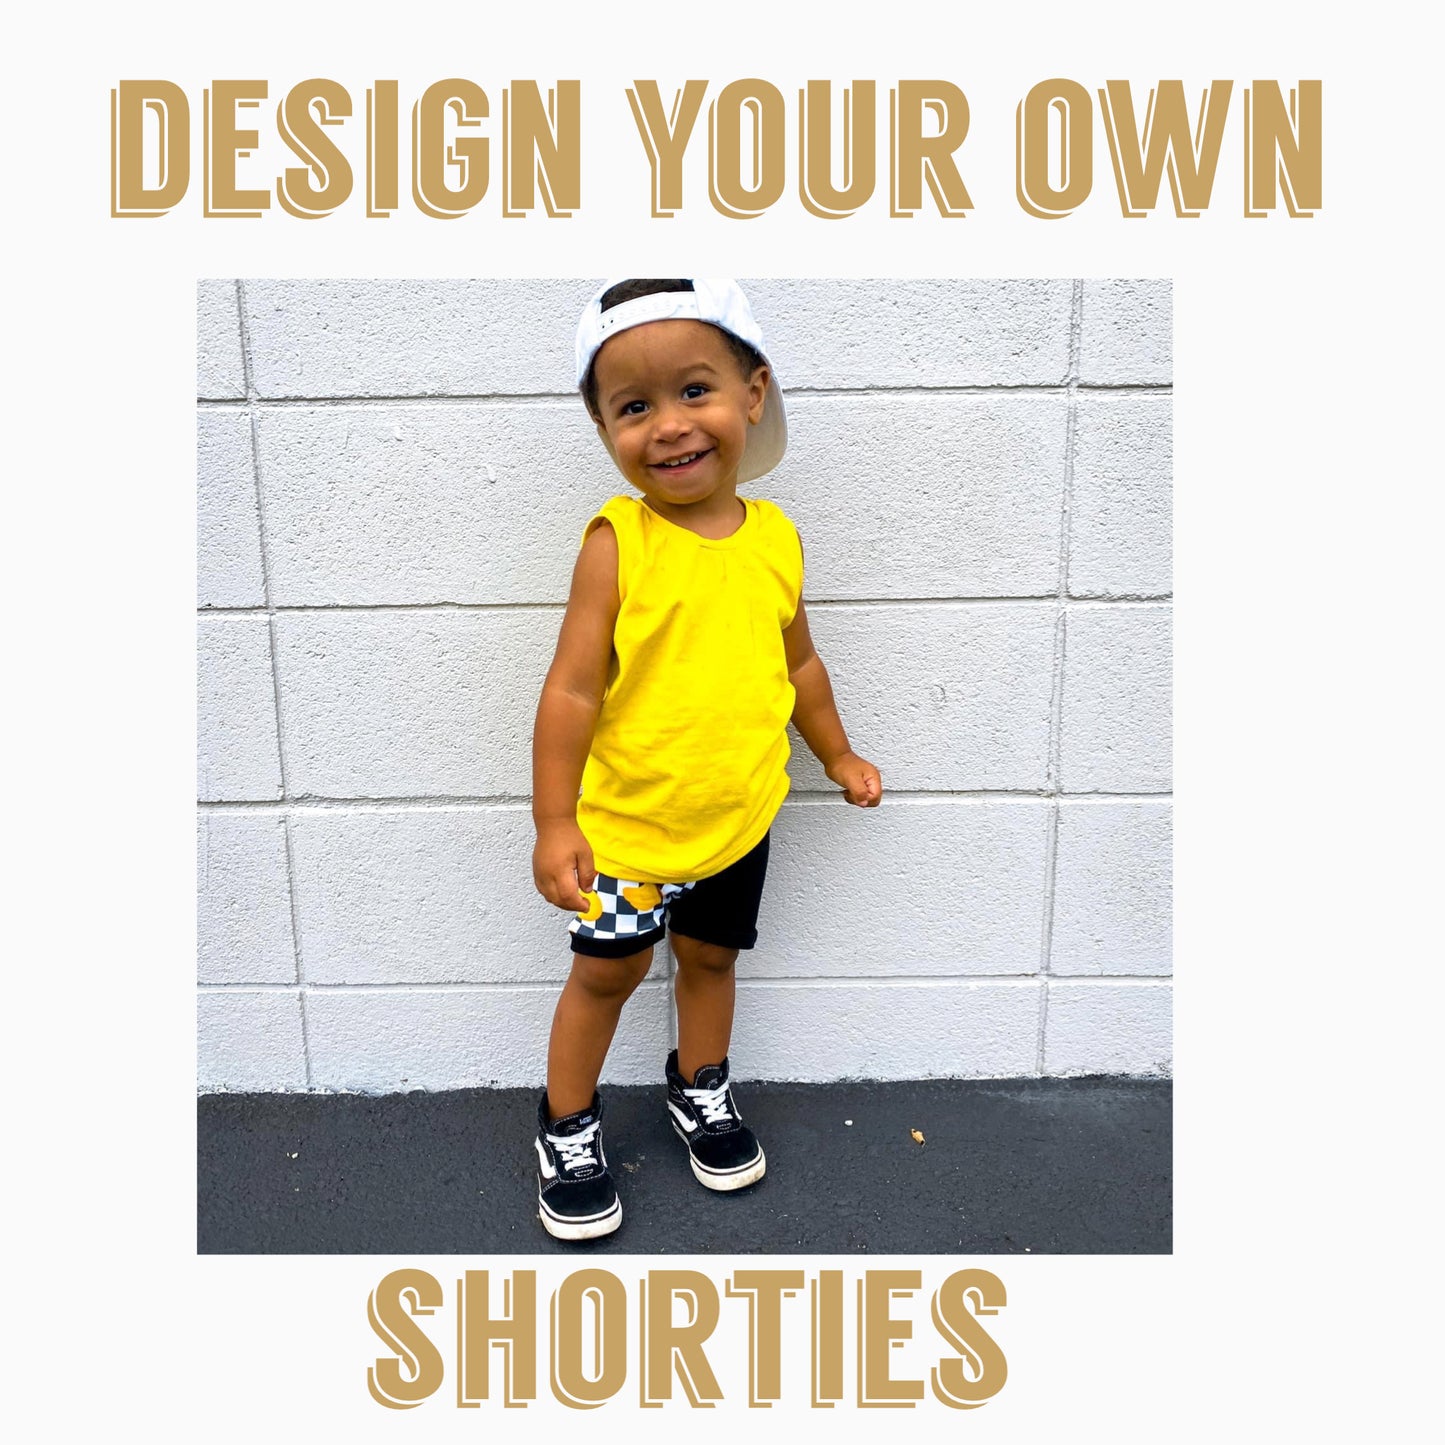 Design your own| Shorties